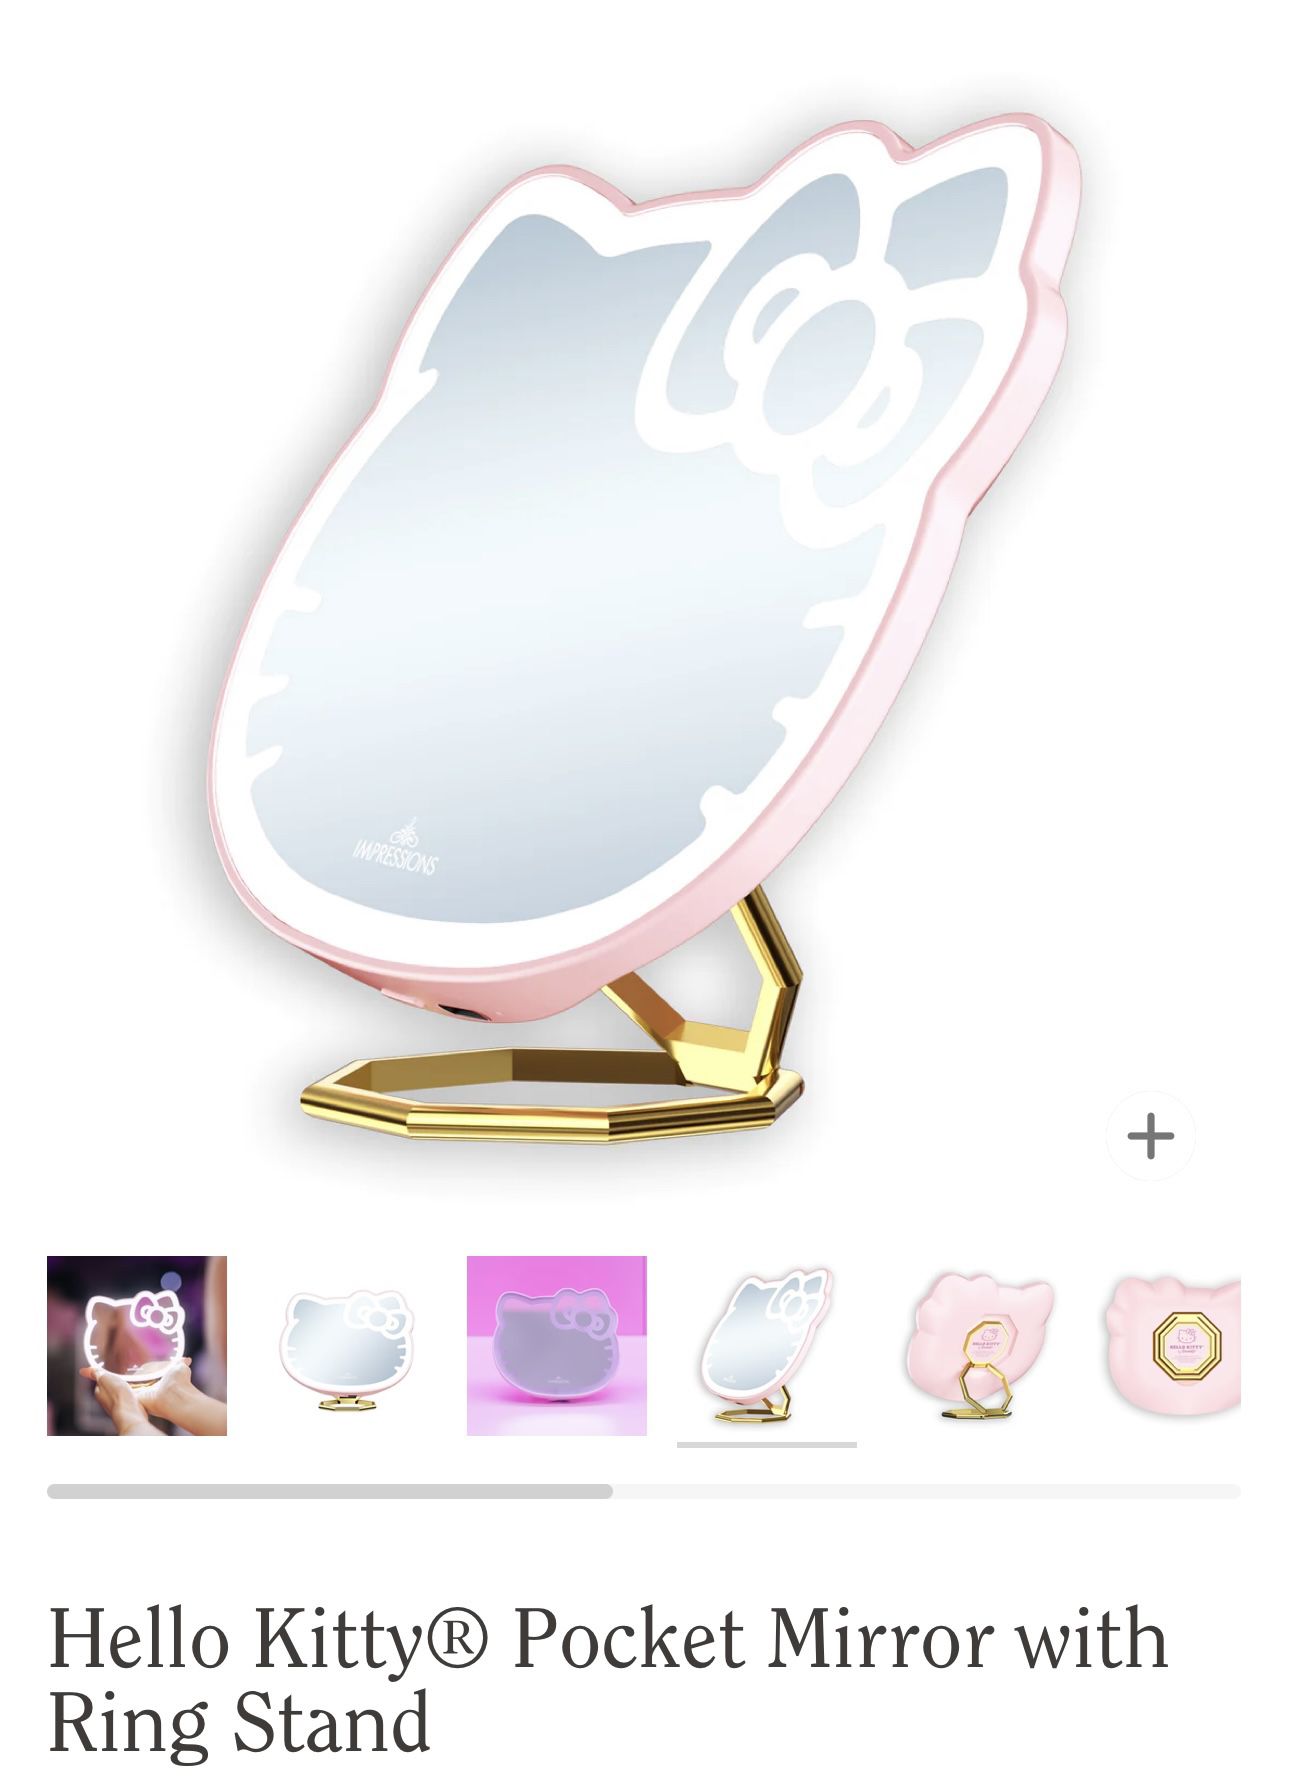 Hello Kitty Led Pocket Mirror With Ring Stand* Firm On Price*